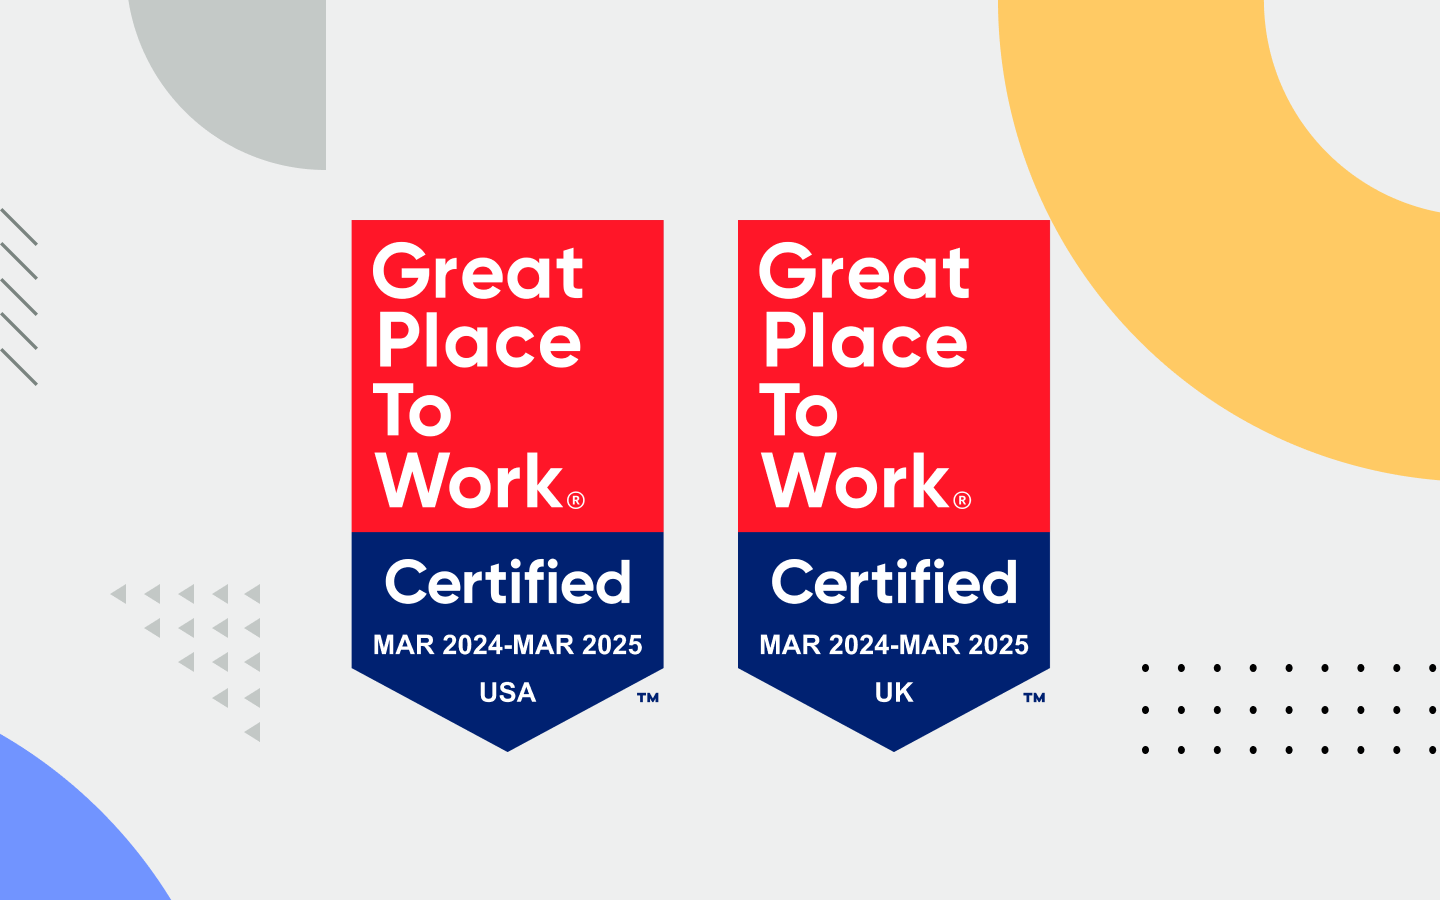 graphic with badges showing Extensis is a Certified Great Place To Work in the USA and UK in March 2024 through March 2025